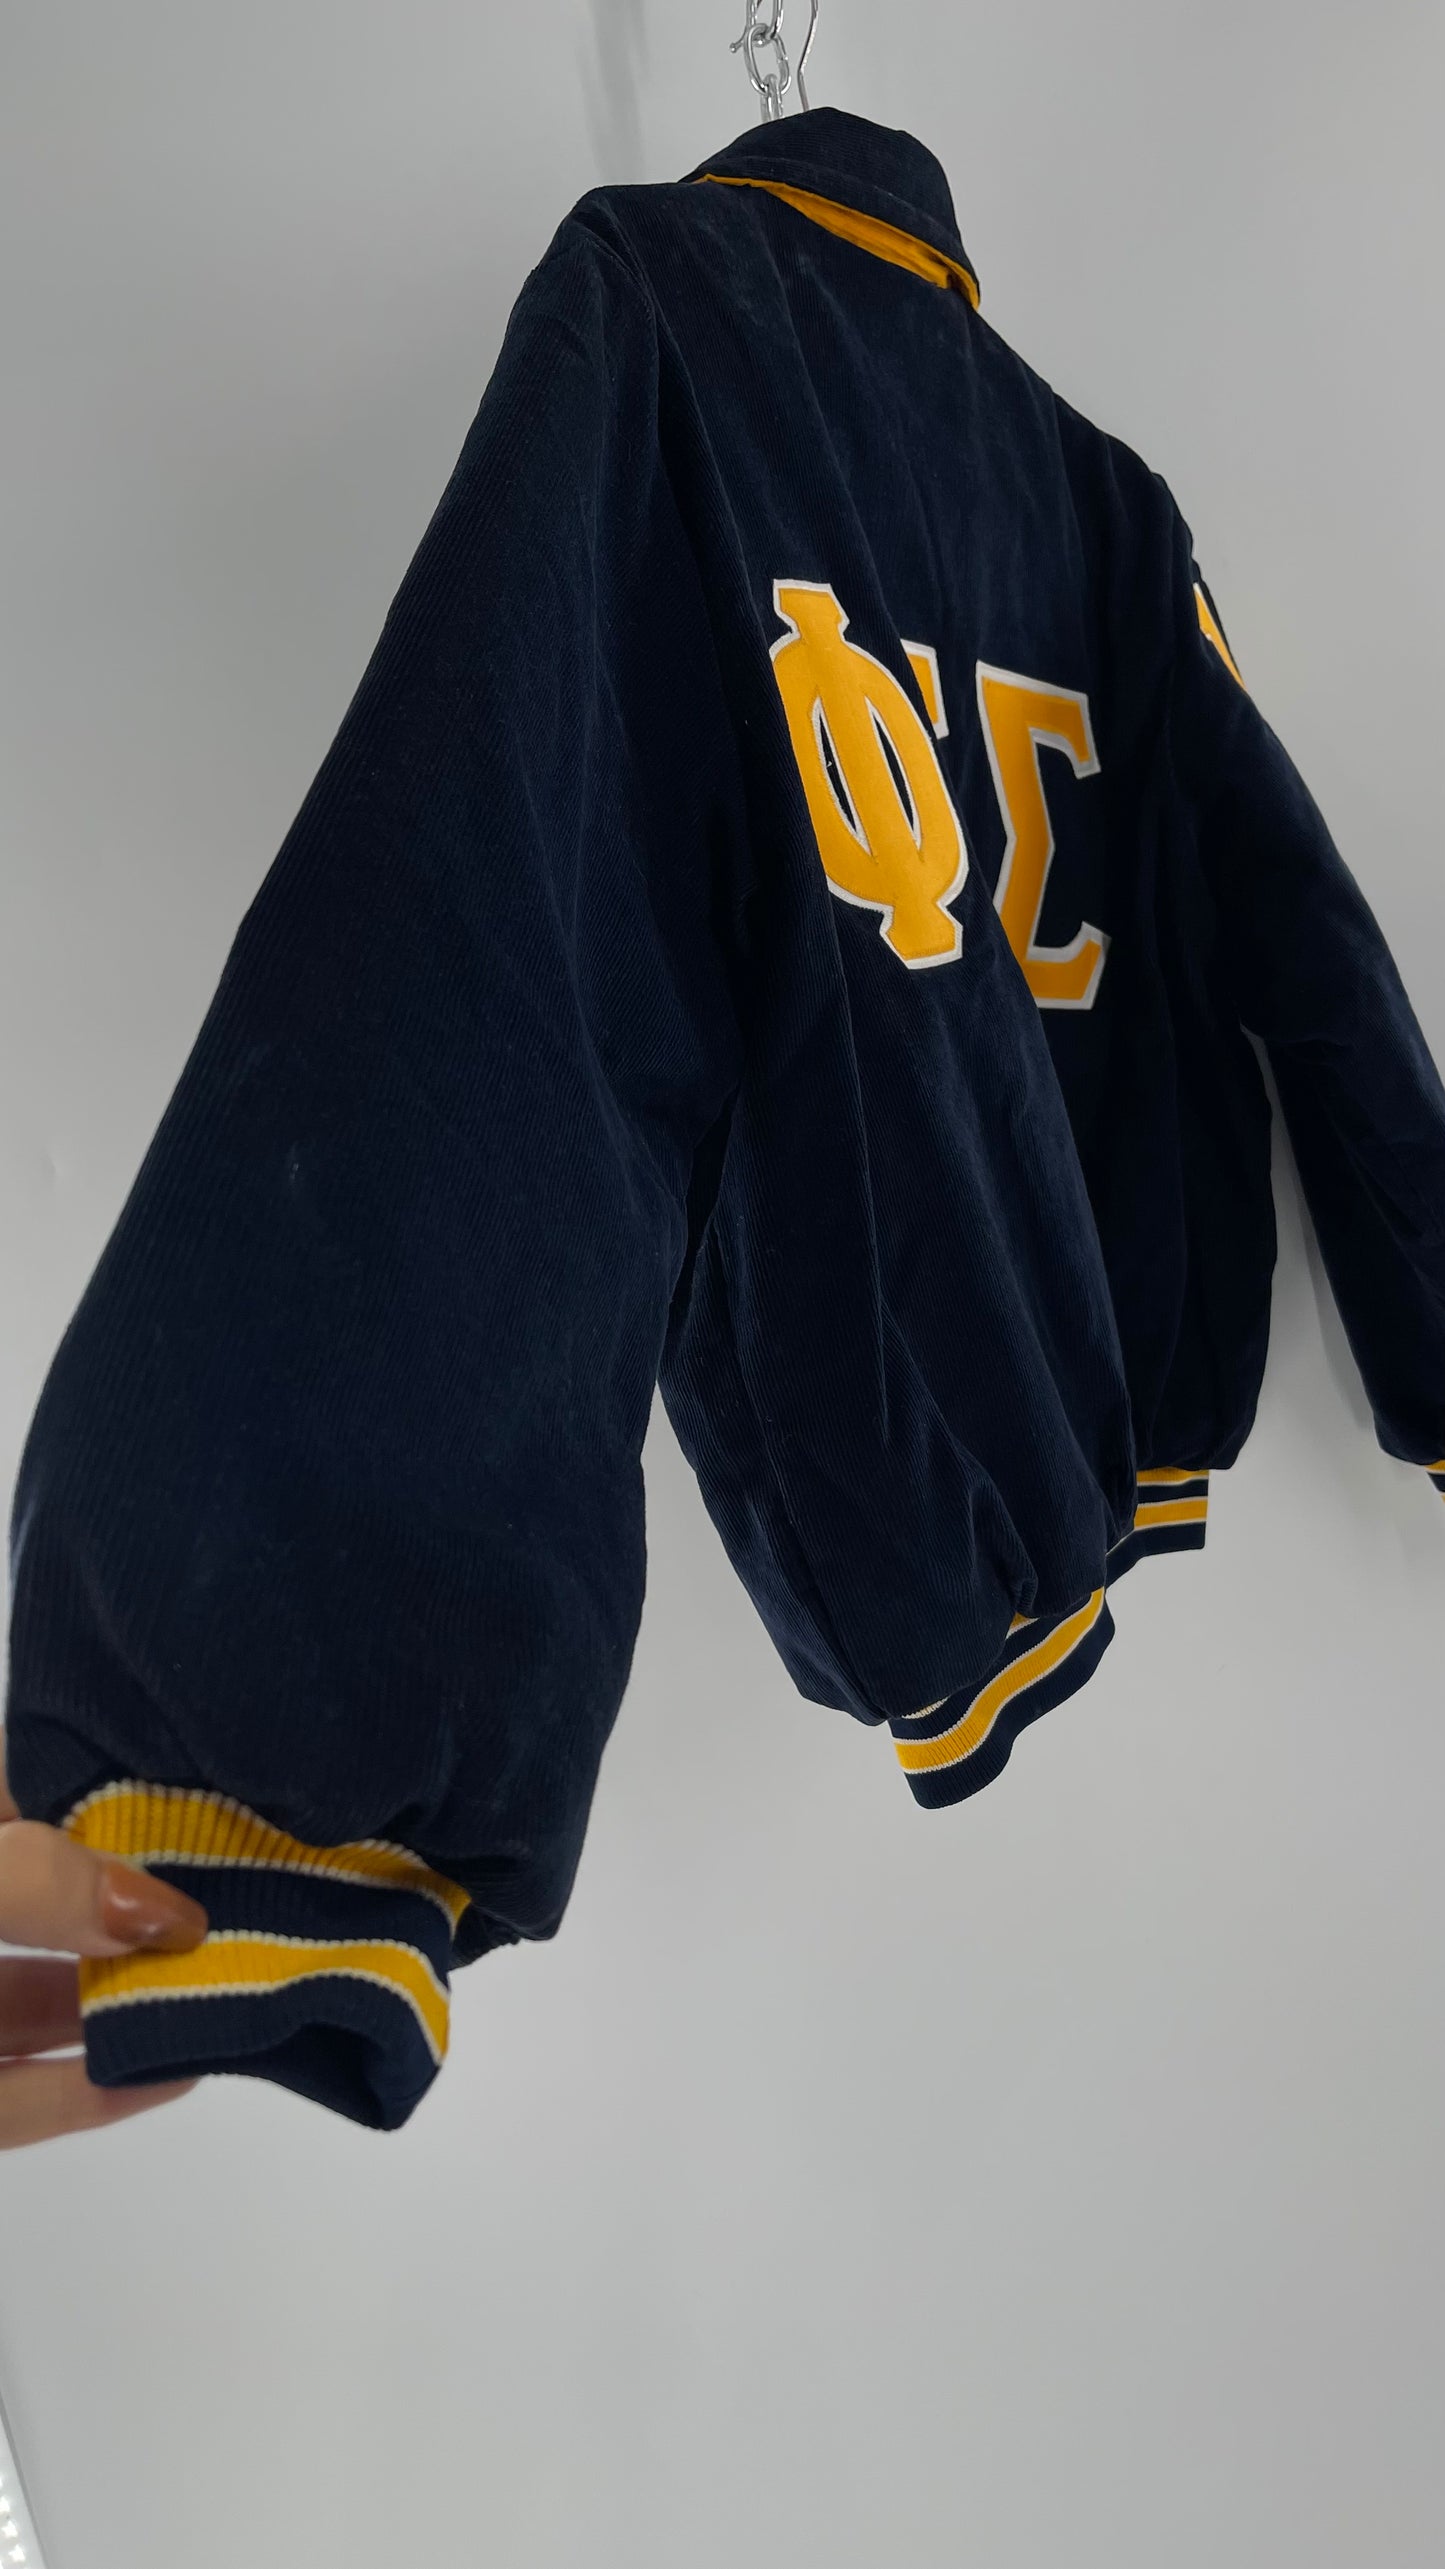 Birdie Vintage Phi Sigma Sigma Navy Blue Corduroy Varsity/Sorority Jacket with Contrast Yellow Patches and Embroidered “Paula” Monogram (Large)